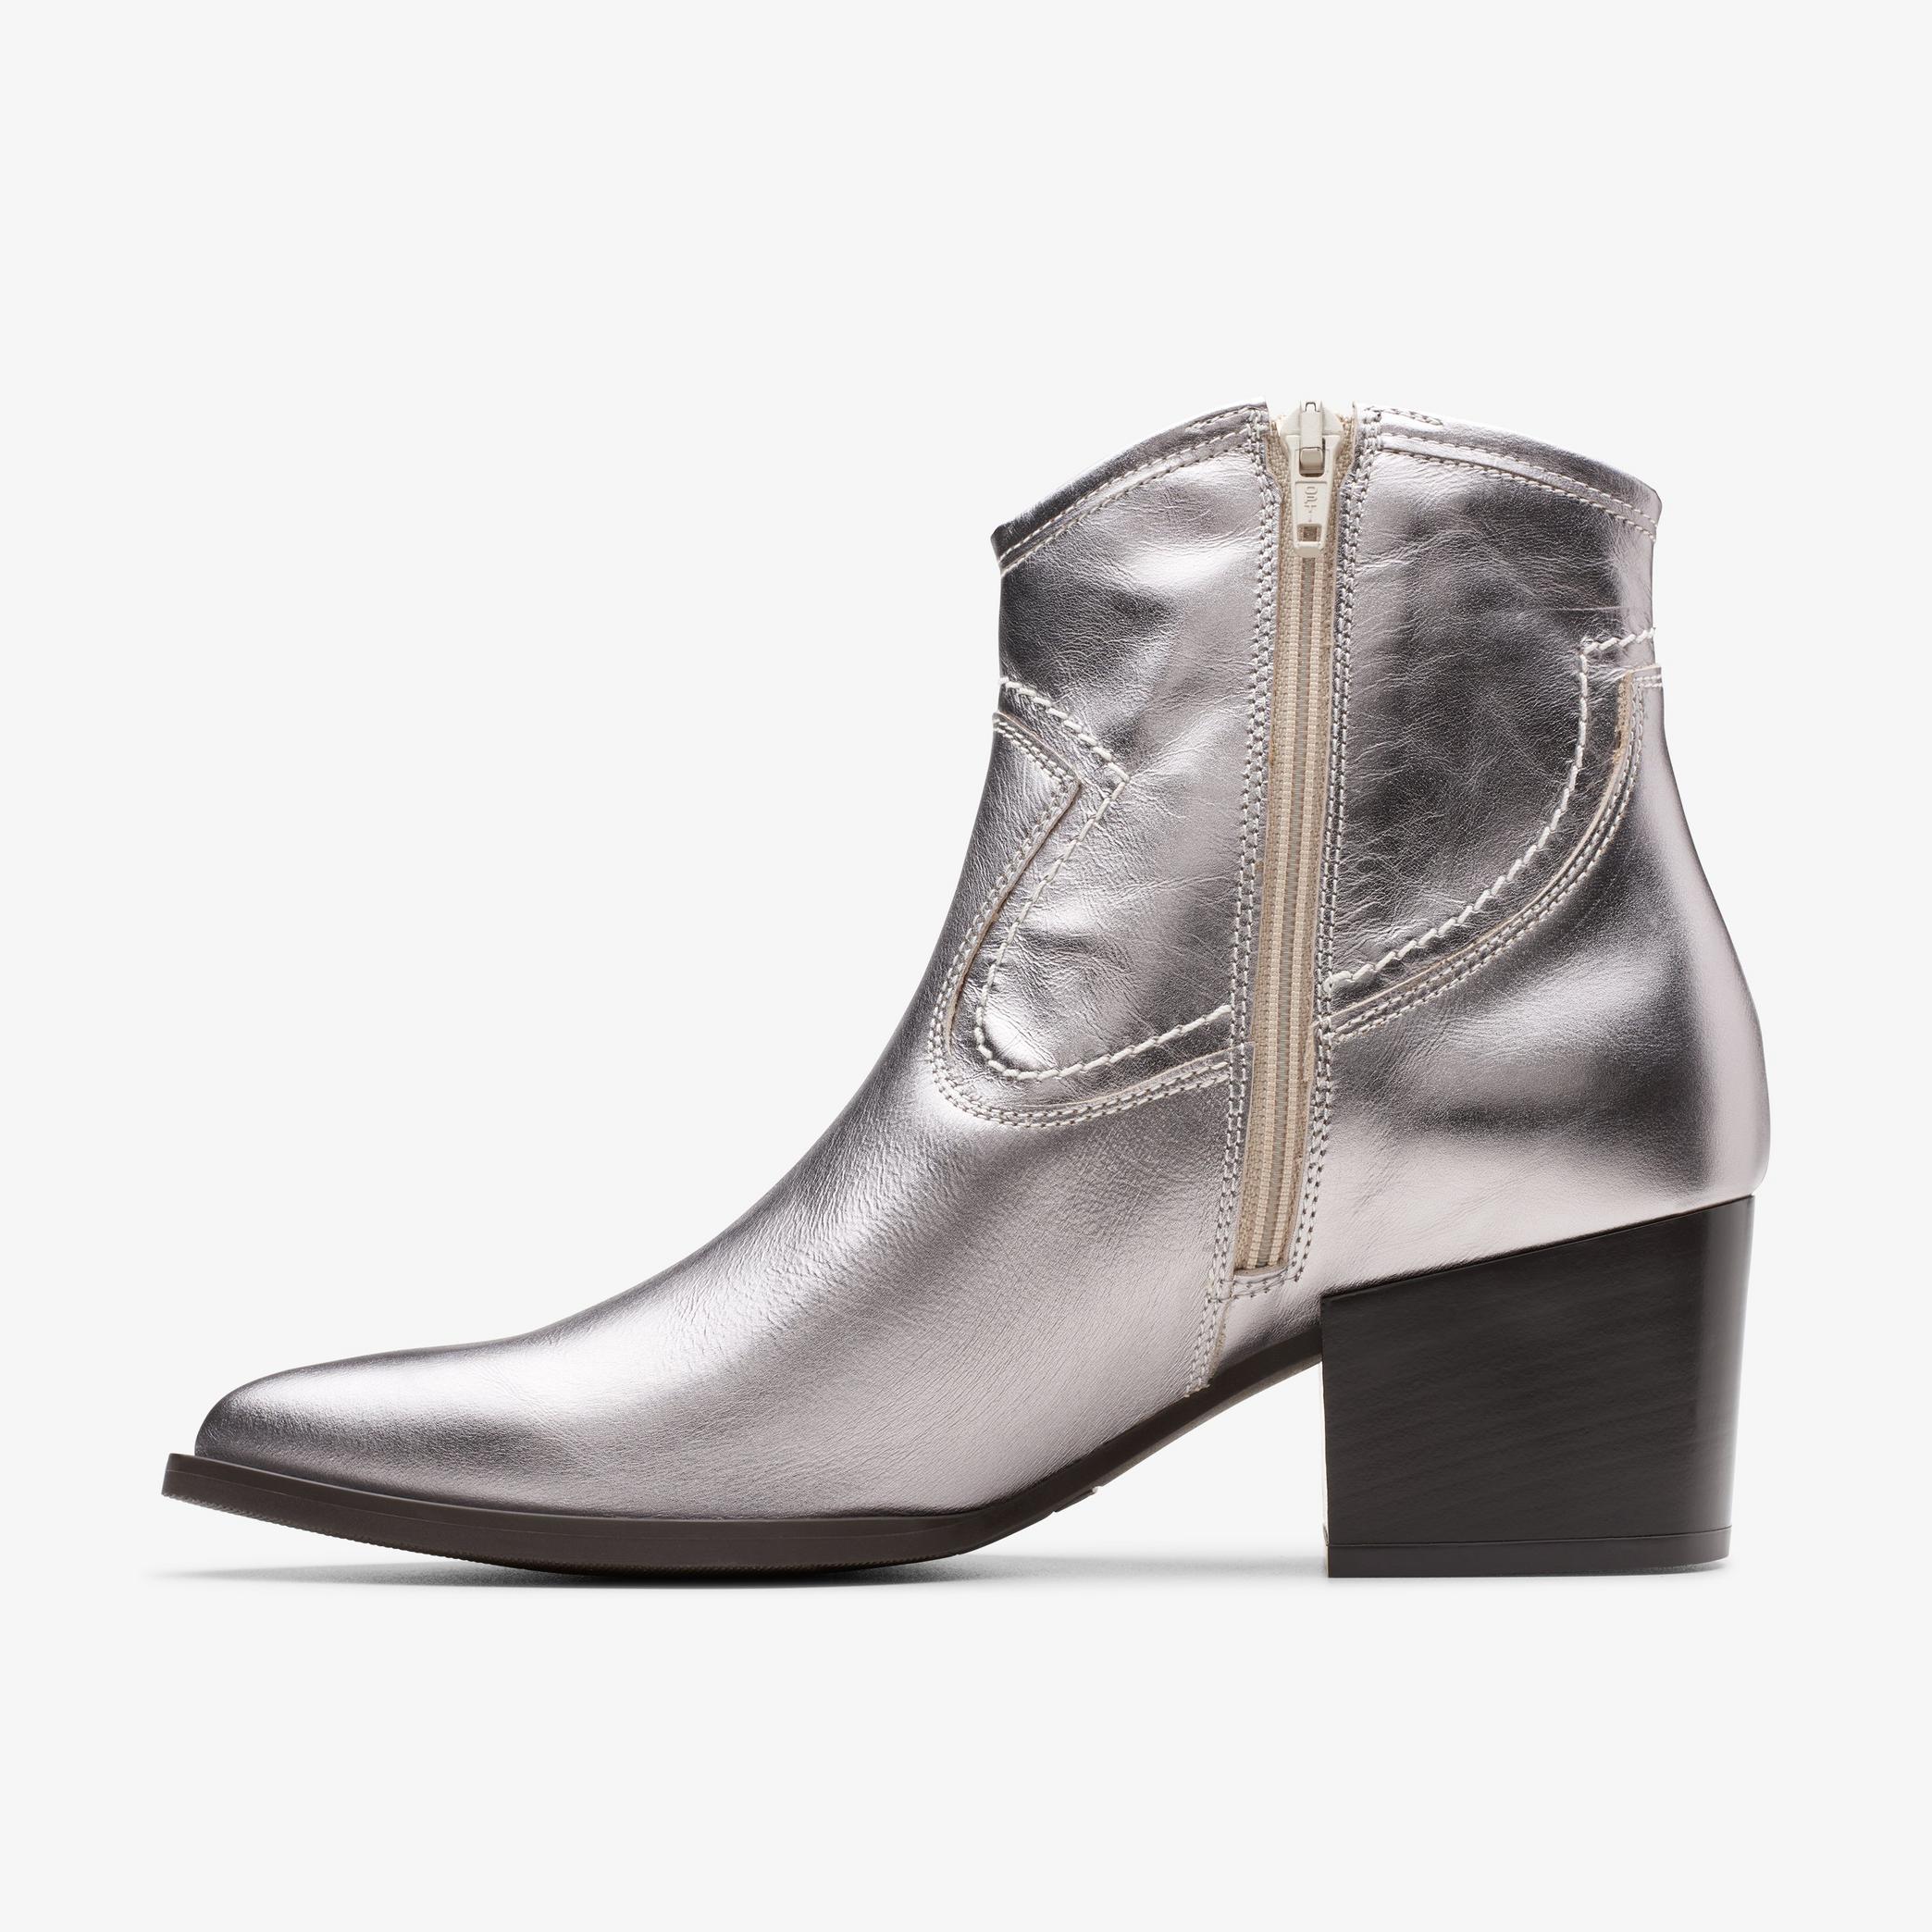 Elder Rae Silver Leather Ankle Boots, view 4 of 8